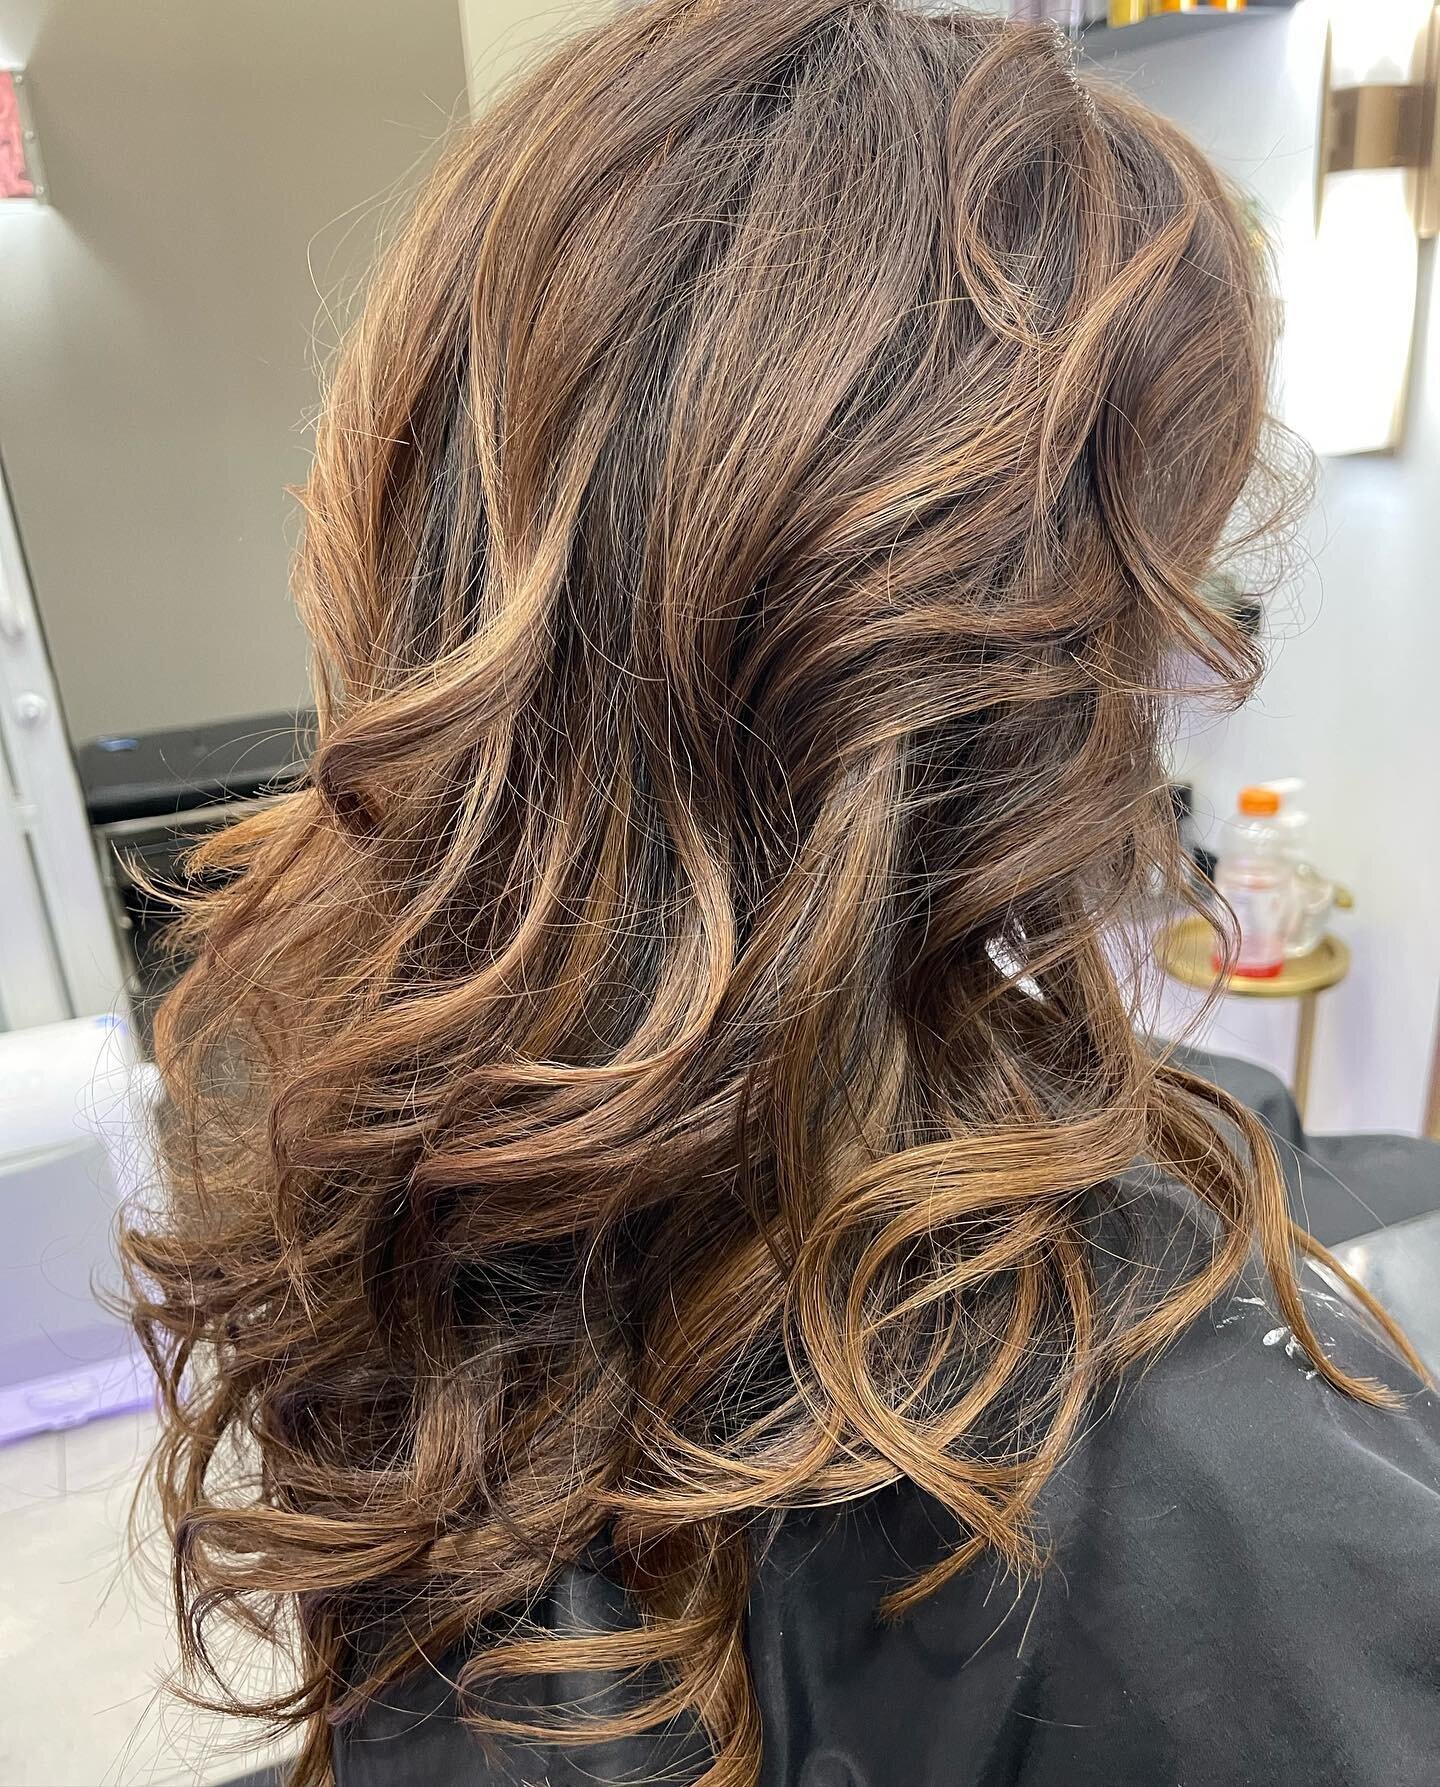 This client came to me with very damaged hair from previous bleaching but insisted to have blond highlights&hellip; so went another route installed 16 inch extensions from @bellamihair with balayage pieces so I wouldn&rsquo;t have to re bleach her ha